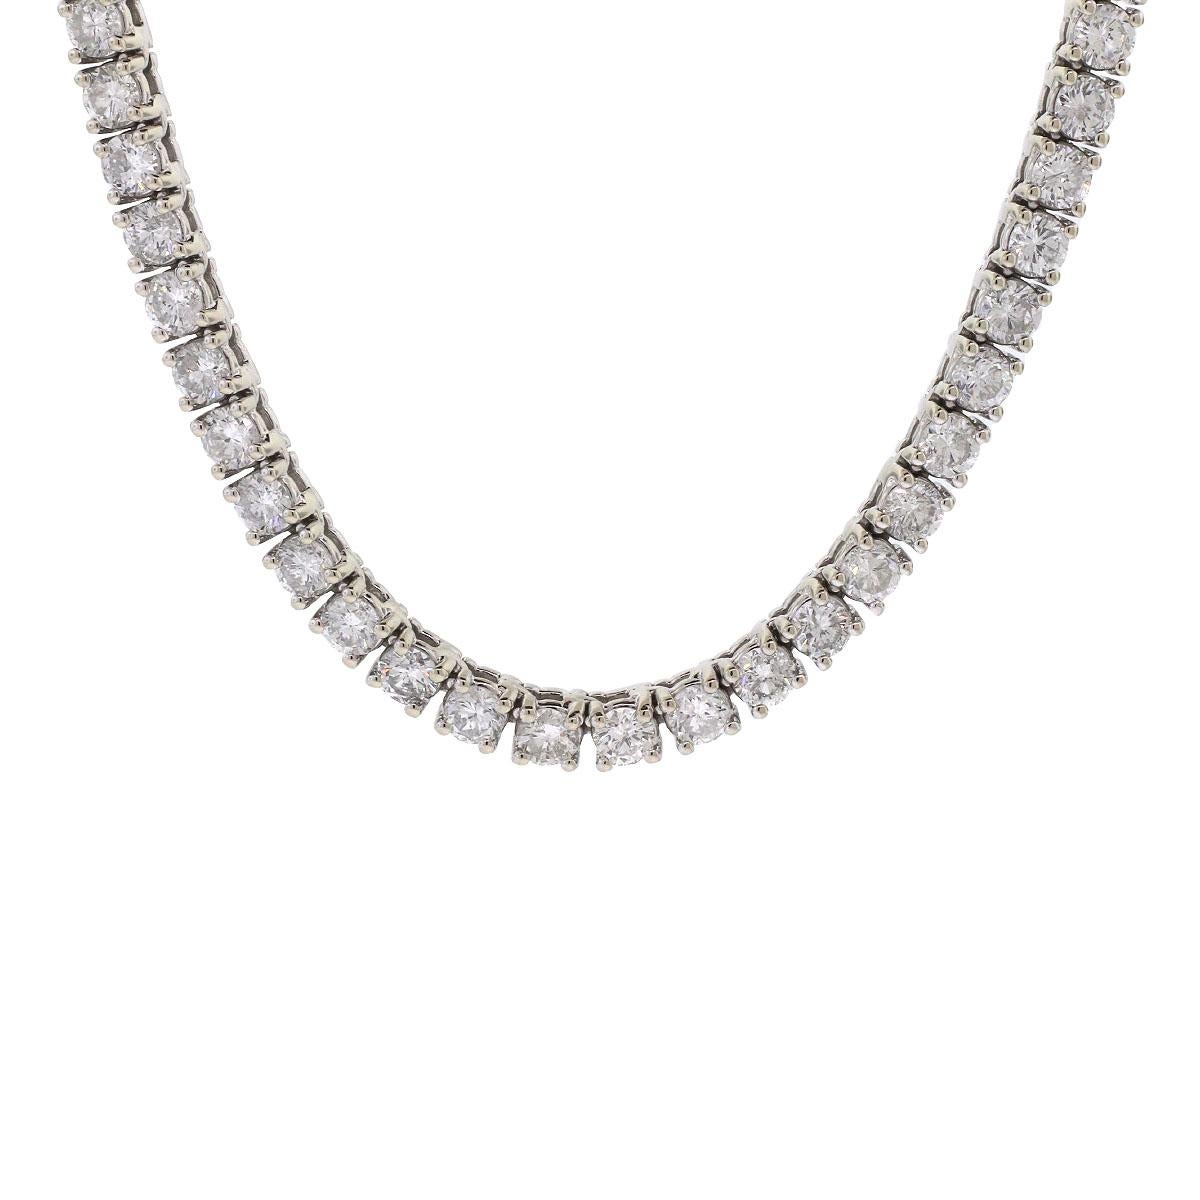 Company: N/A

Style of jewelry: Diamond tennis necklace

Material: 14k white gold

Stones: 120 stones of approximately 24ctw of round cut Diamonds

Dimensions: 20 inches in length

Weight: 45.8g (29.5dwt)

SKU: 11599-1